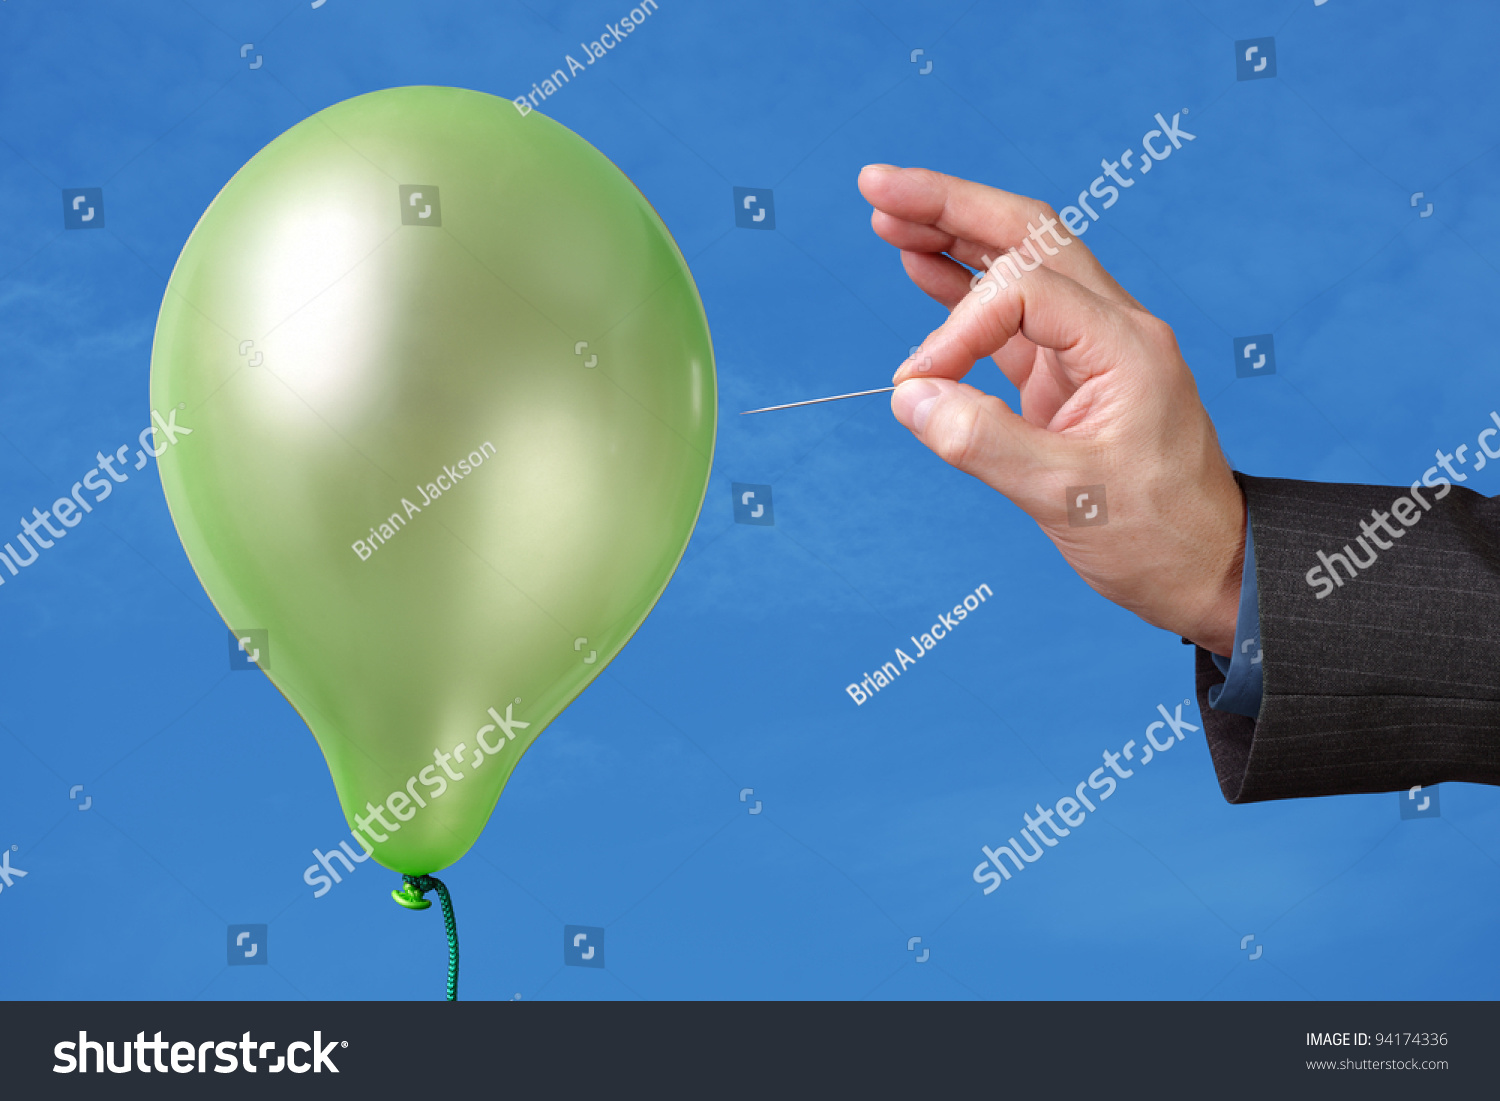 stock-photo-needle-about-to-pop-a-green-